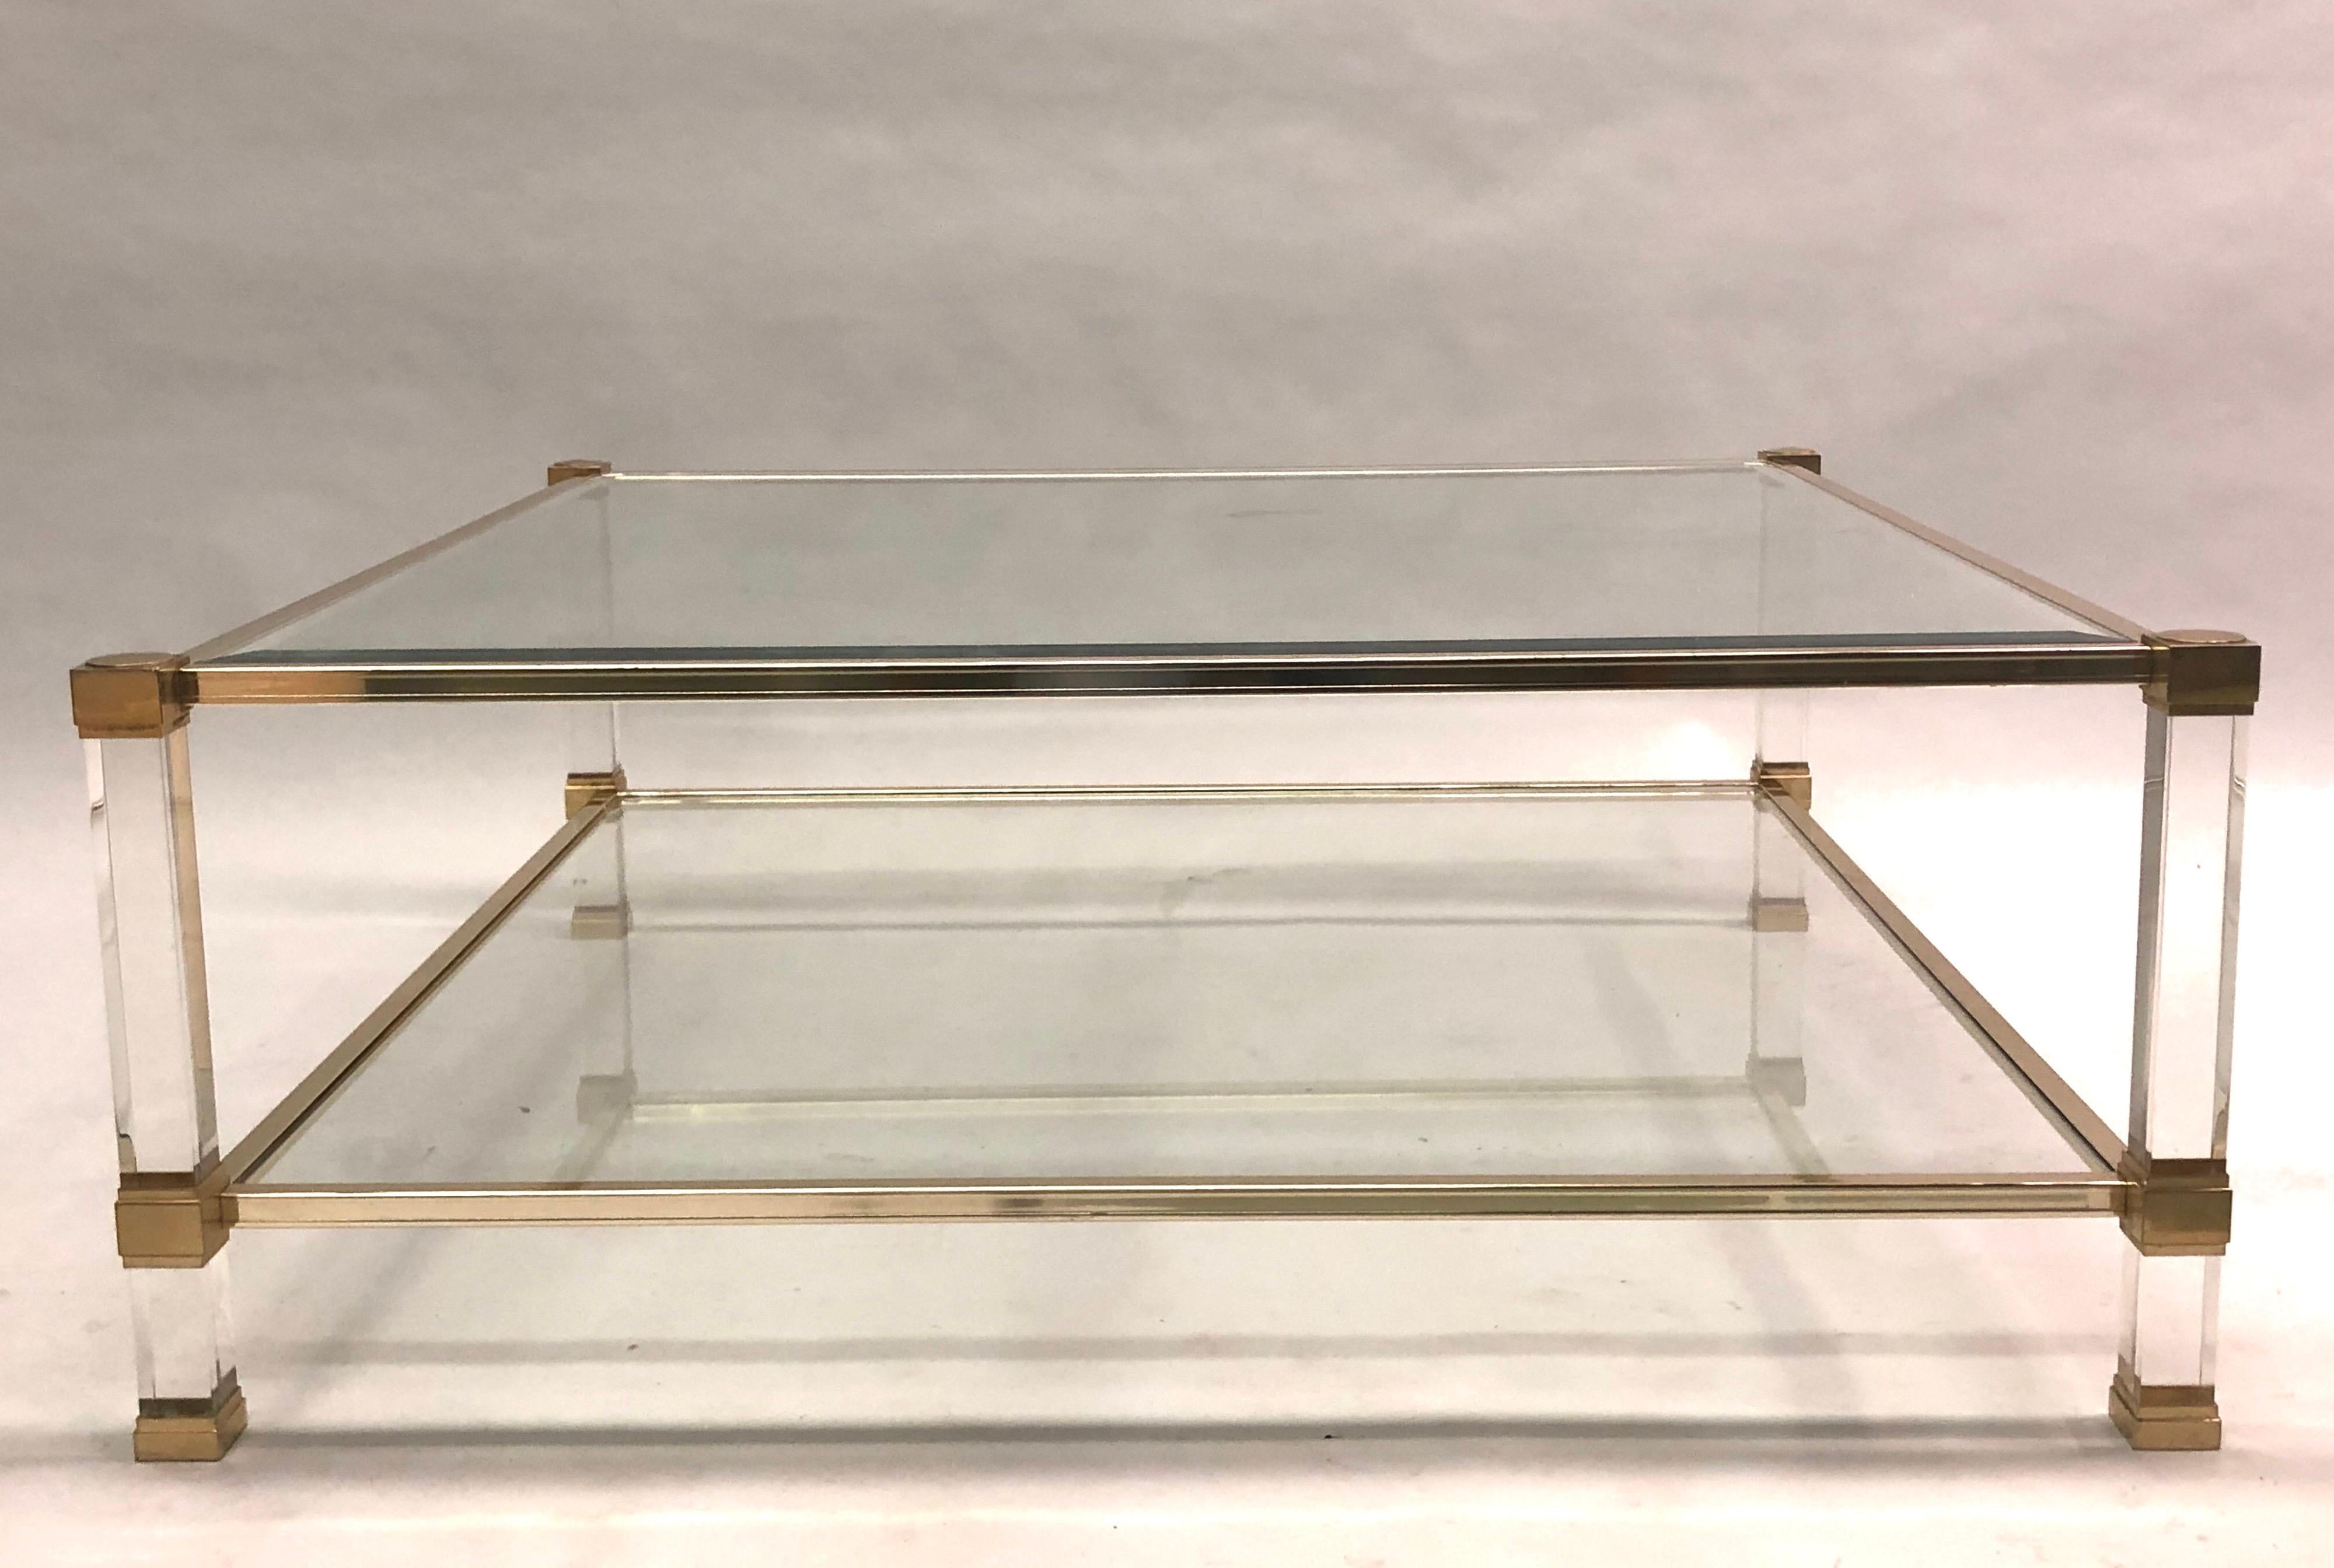 A large, square, French Mid-Century Modern, double level cocktail table in Lucite and brass by Pierre Vandel. The square form of this table is rare and highly desirable for chic look and practical applications.